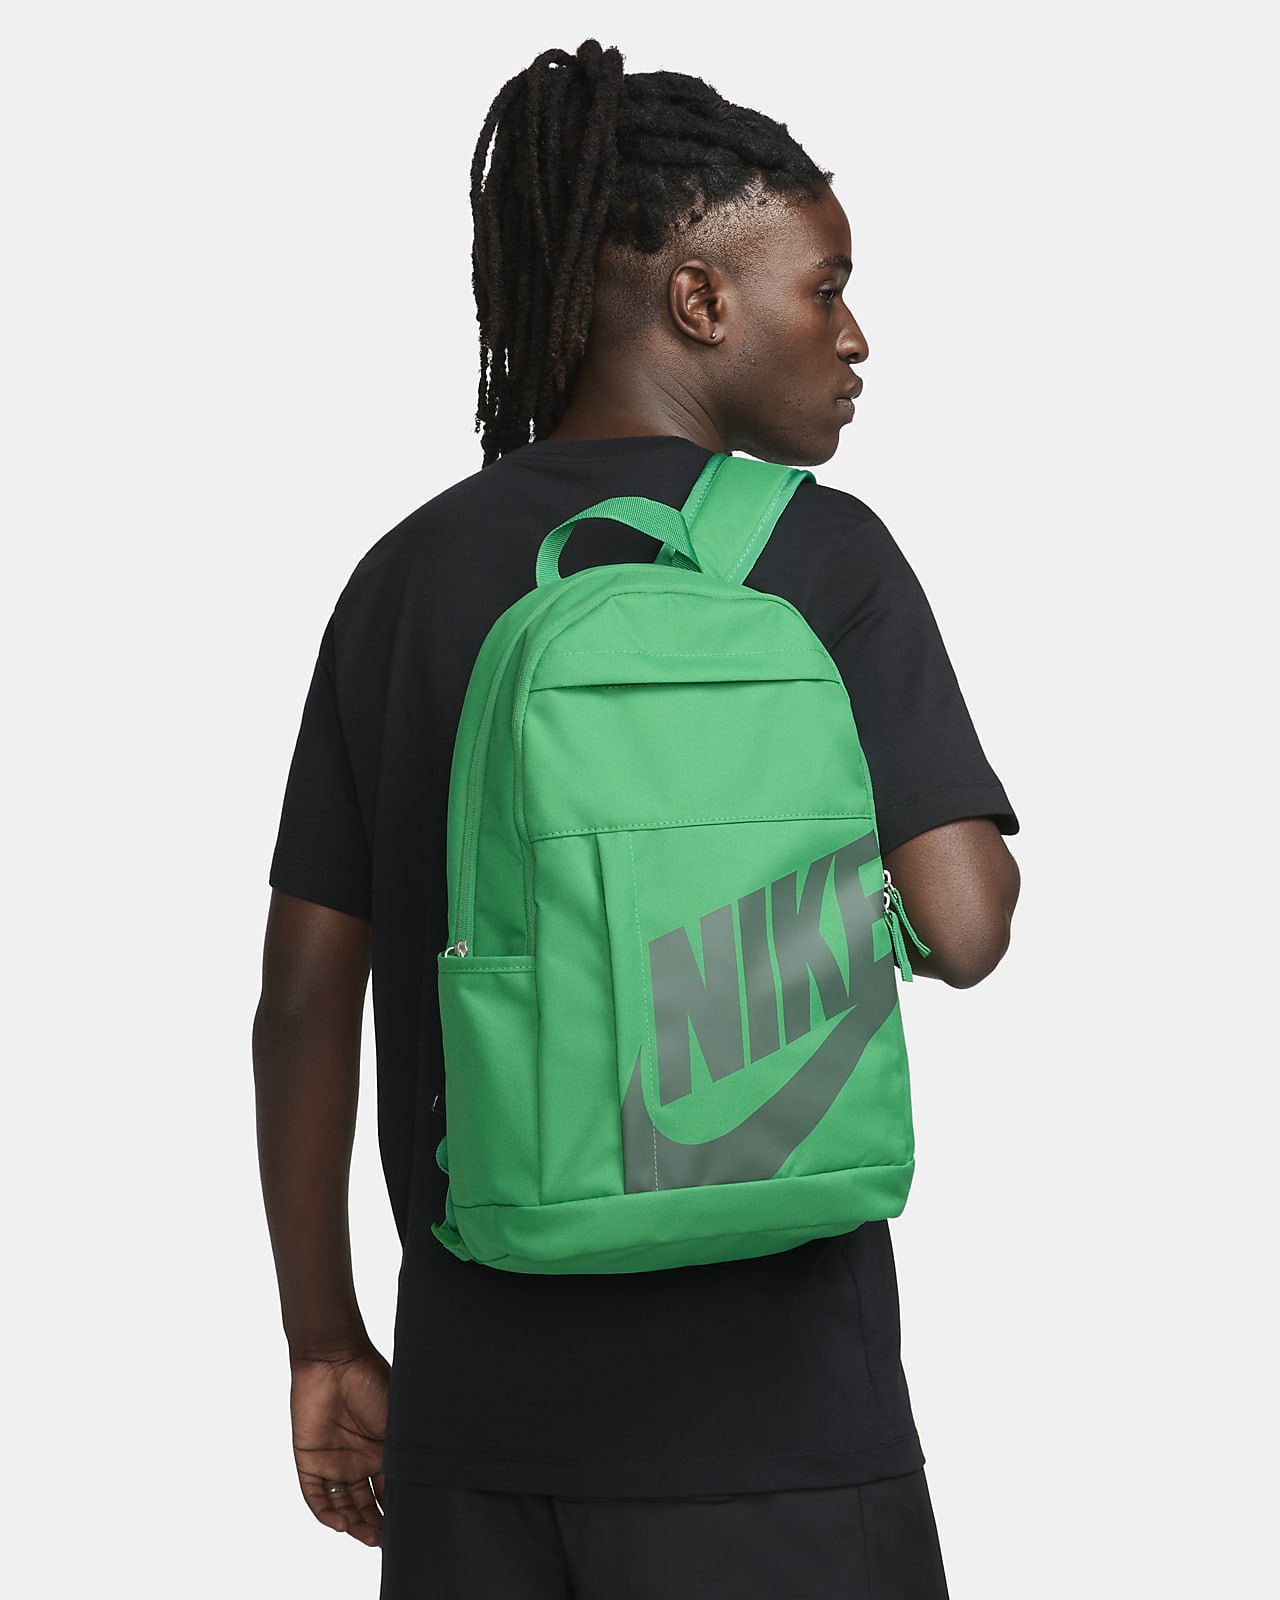 Used Nike Bag | SidelineSwap-cokhiquangminh.vn